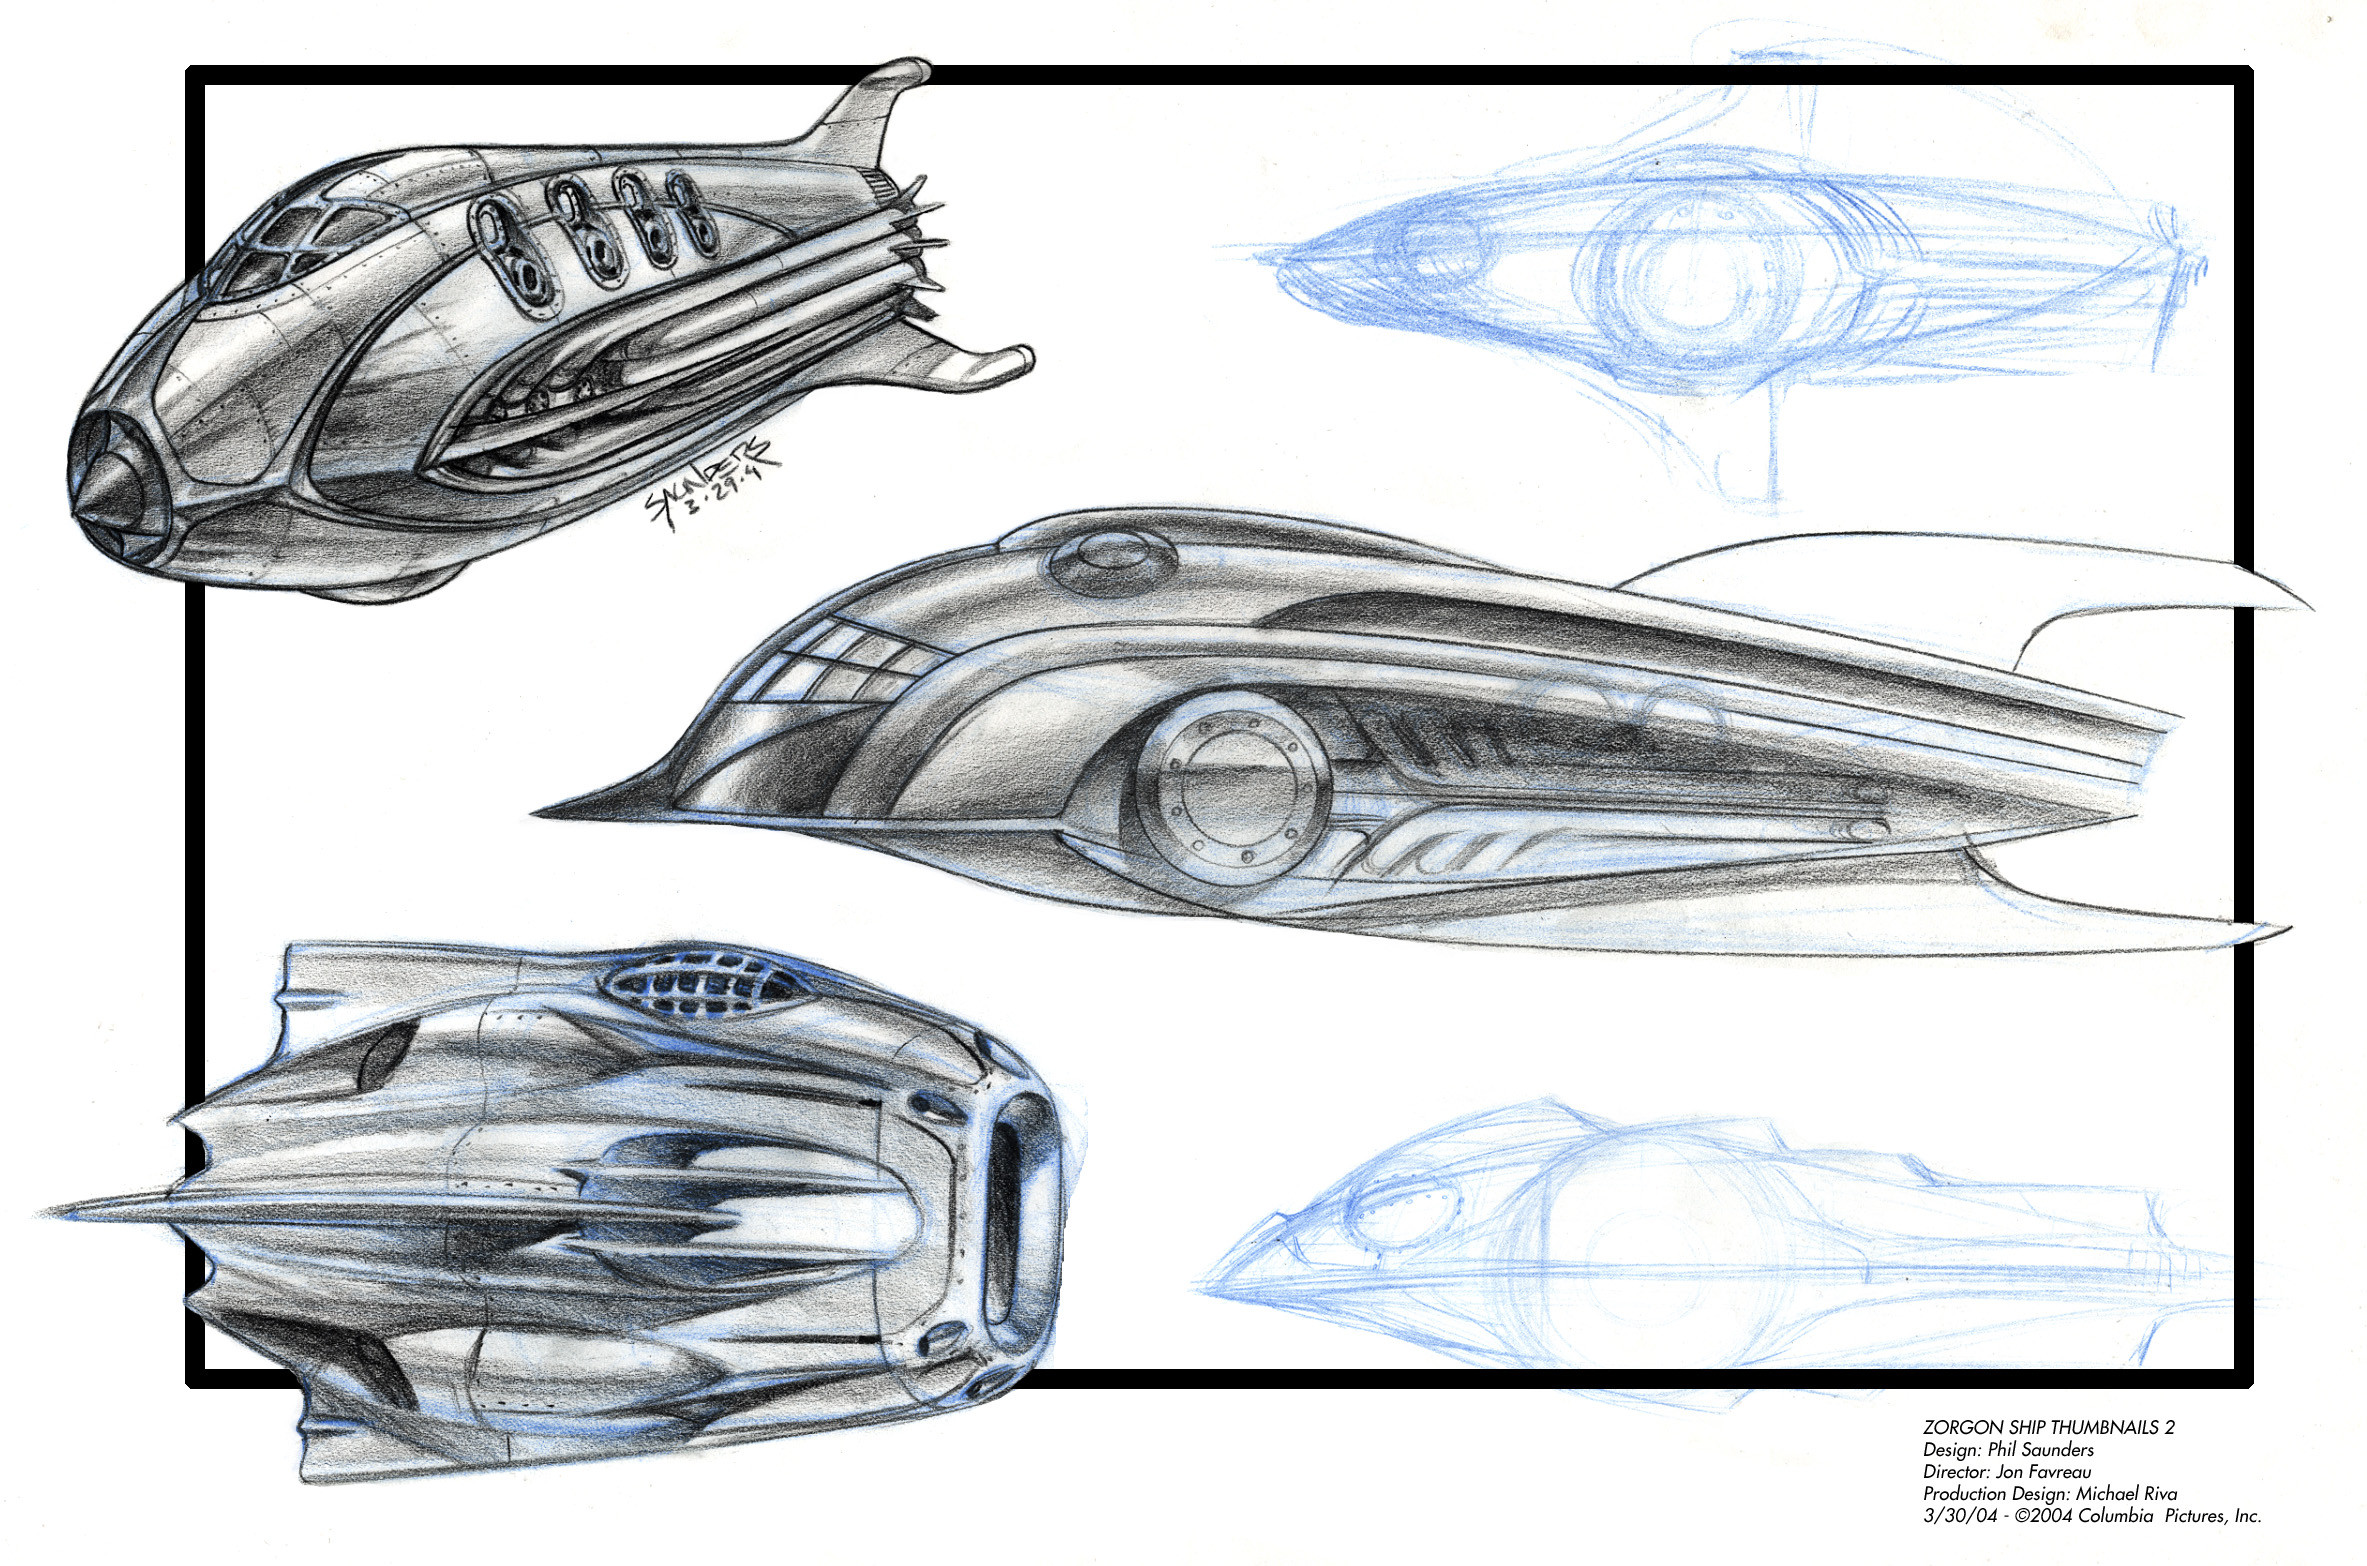 Second Page of Prismacolor sketches for the Zorgon Spaceship. The one in the middle has a lot of elements of the final design. 